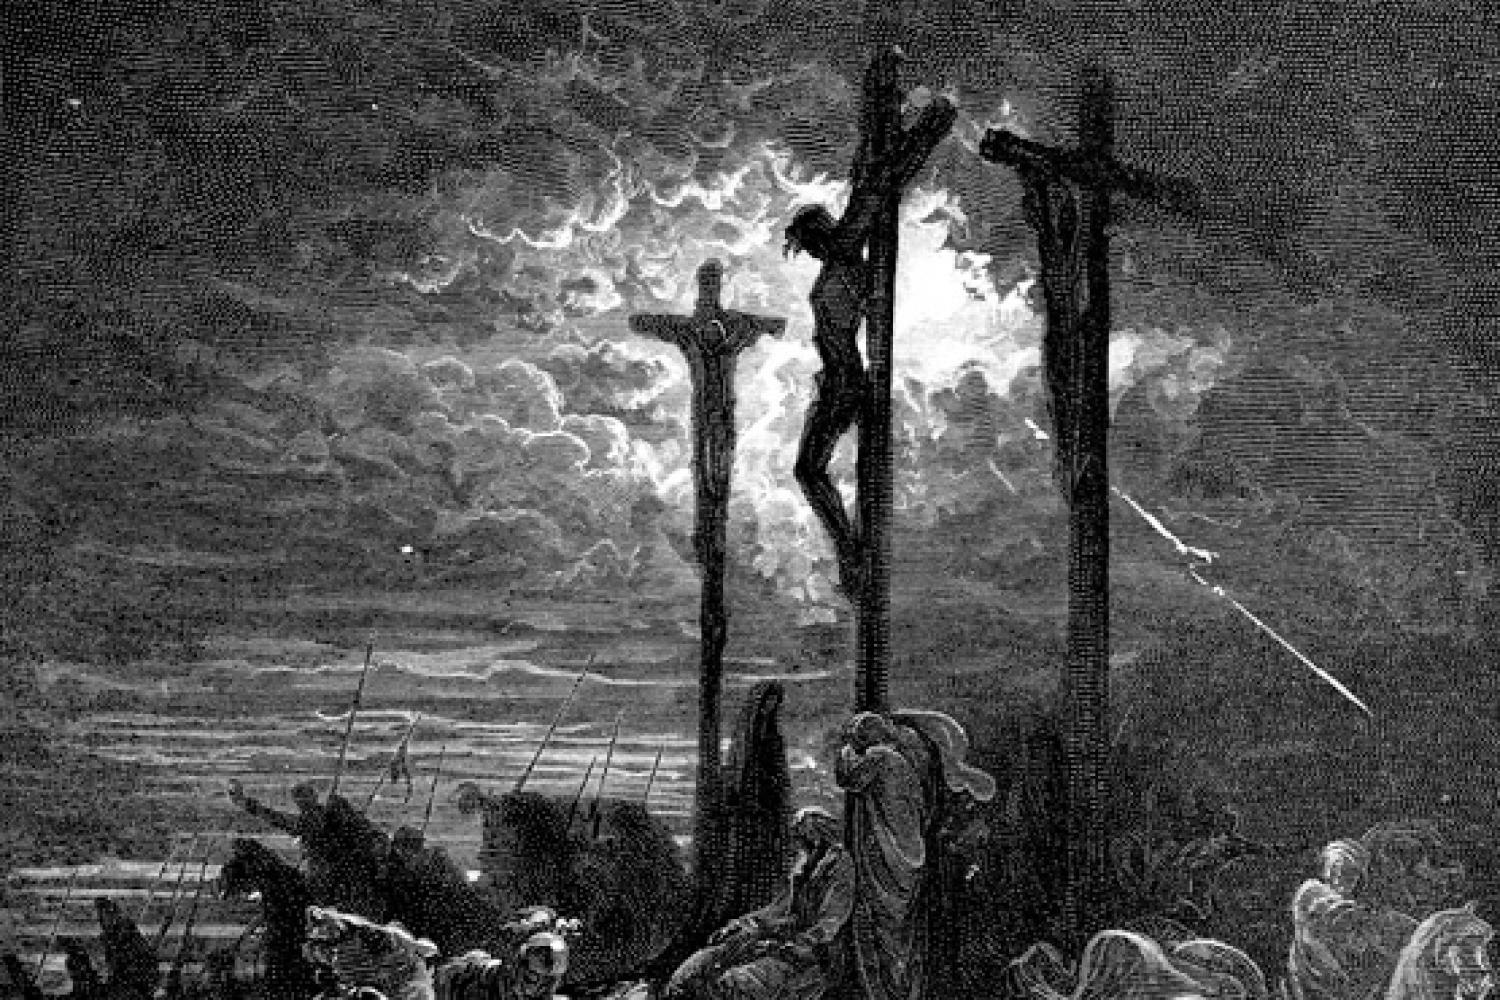 Gustave Dore's "The Darkness at the Crucifixion"